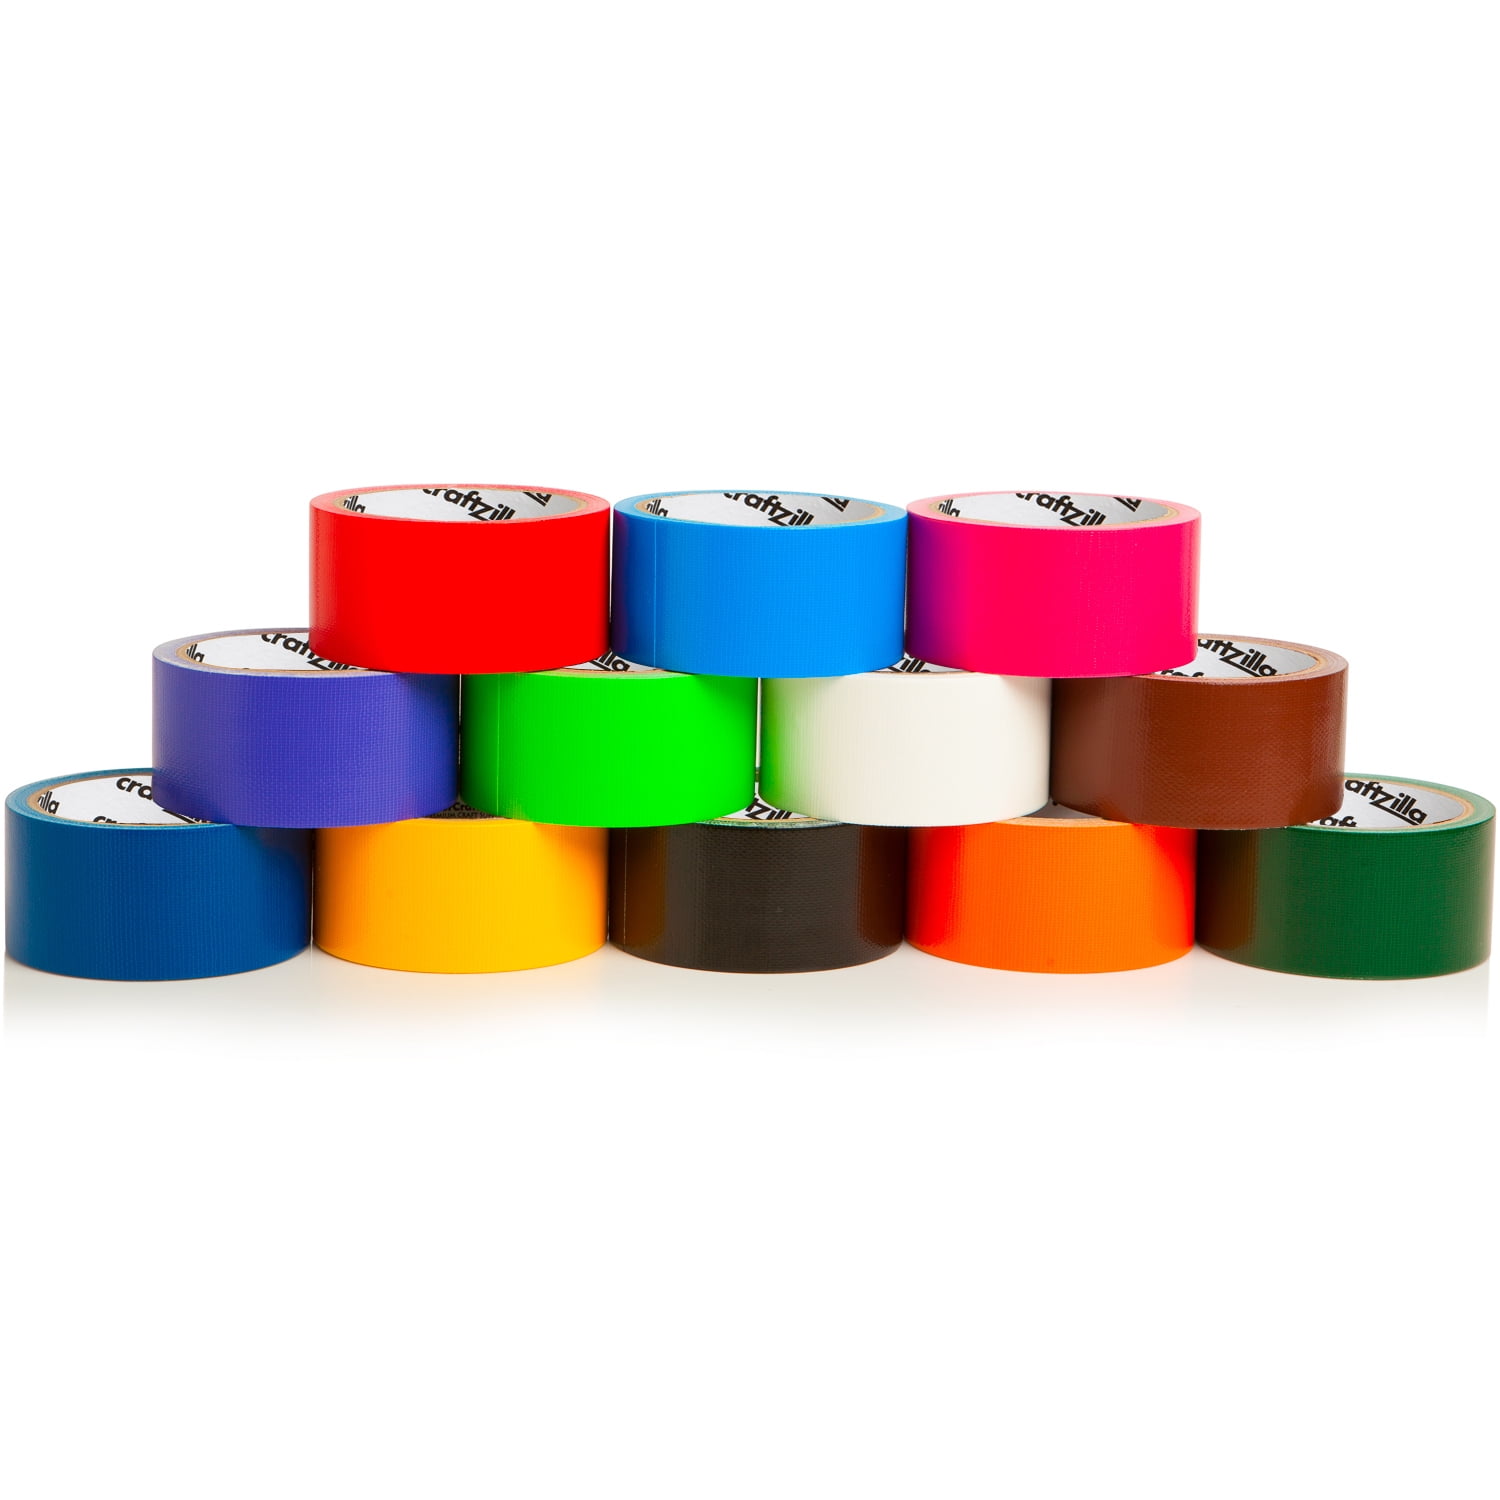 Variety Craft Set for Kids Girls and Boys Colorful DIY Art Kit Design Tapes 10 Color Multi Pack Craftzilla Colored Duct Tape 10 Yards Rainbow Colors 